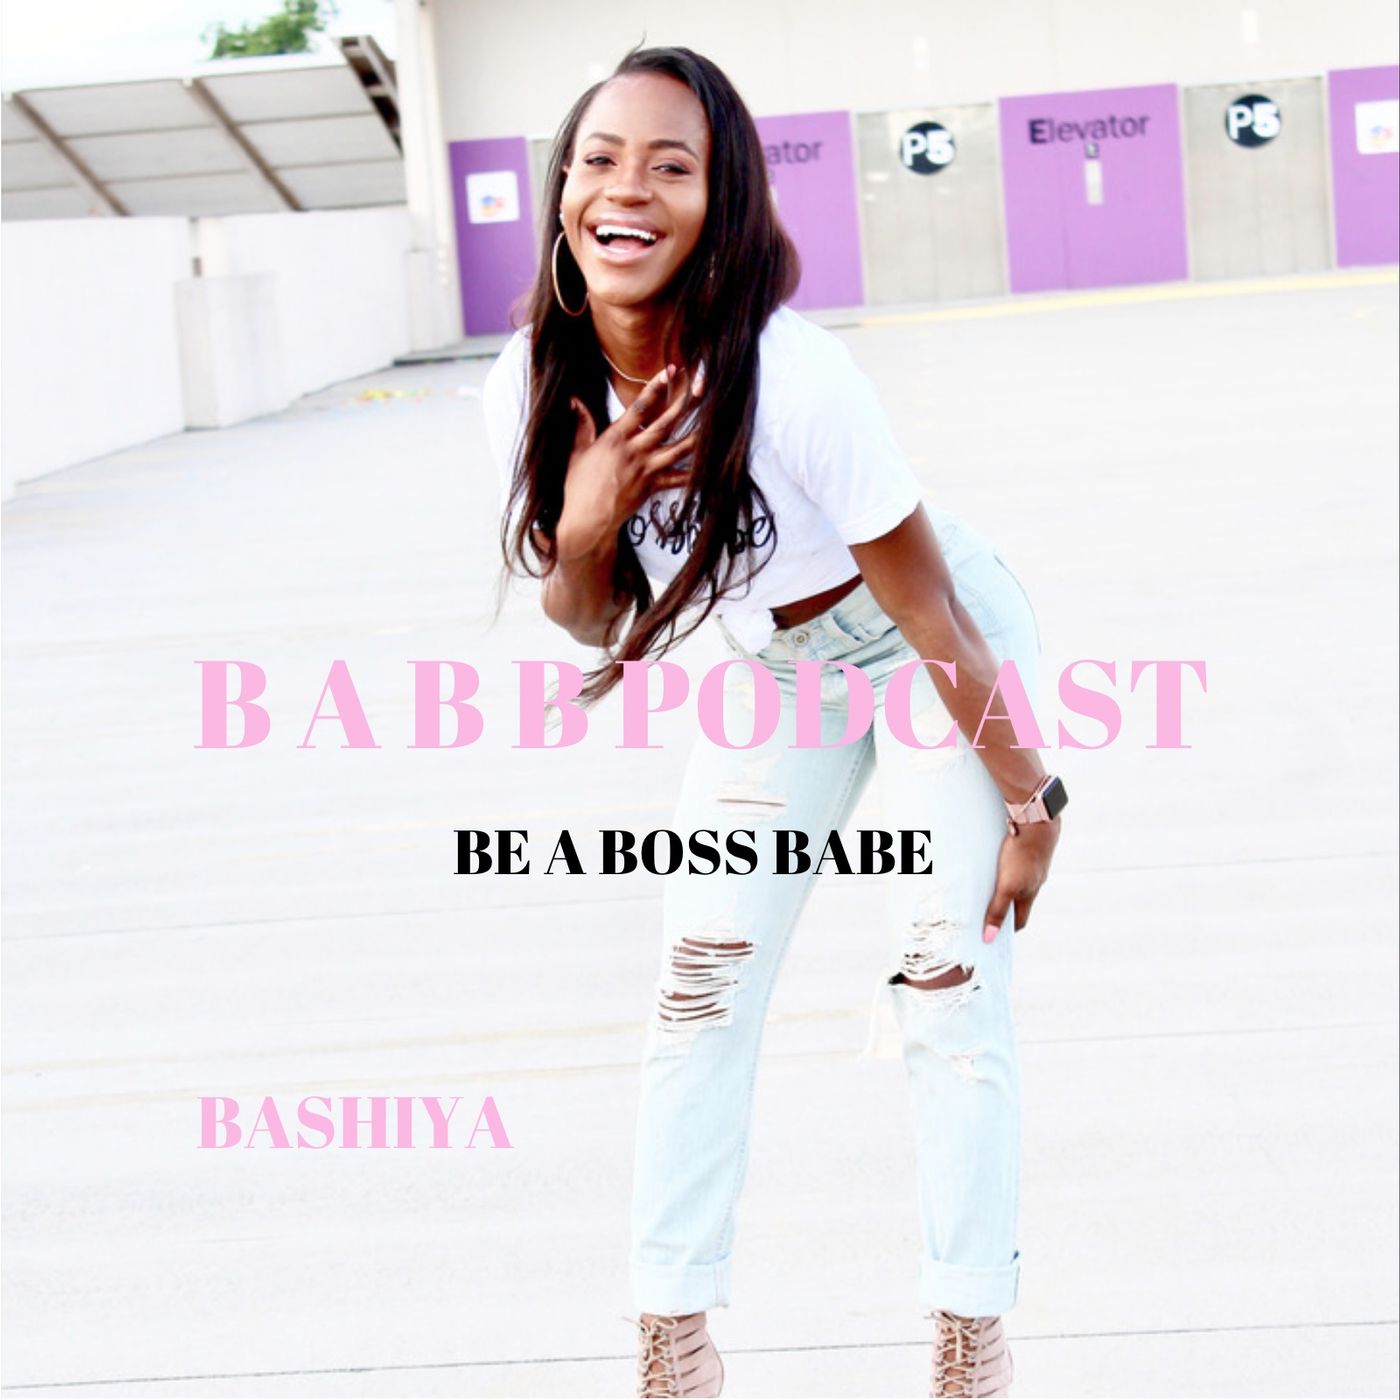 BABB PODCAST | BEING A BOSS IS HARD | GETTING DISCOURAGED & FINDING YOUR WHY | BE A BOSS BABE PODCAST| BASHIYA